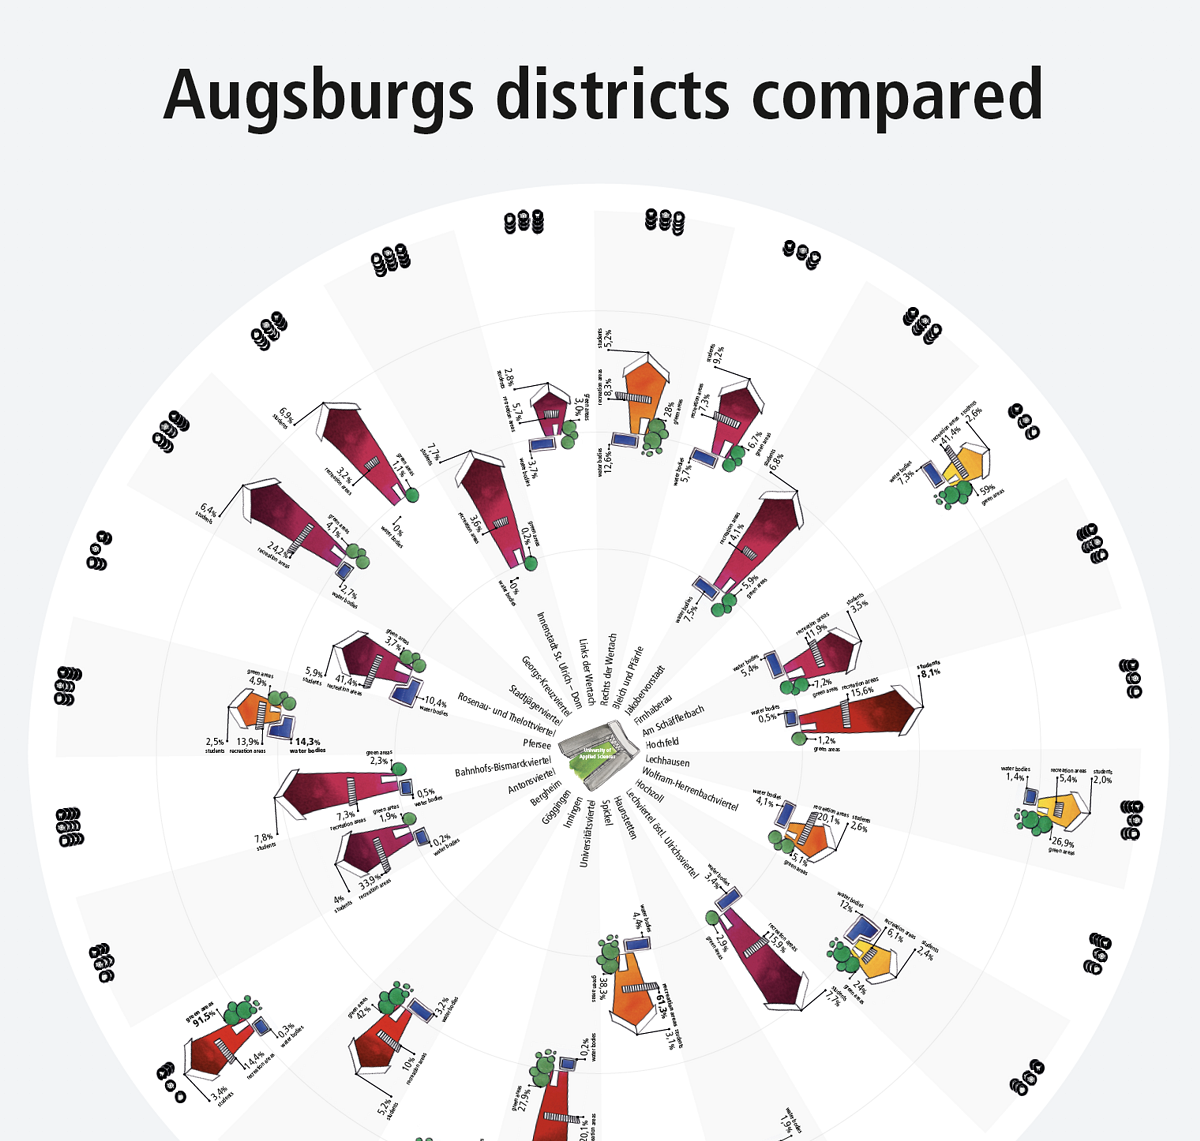 Augsburgs districts compared